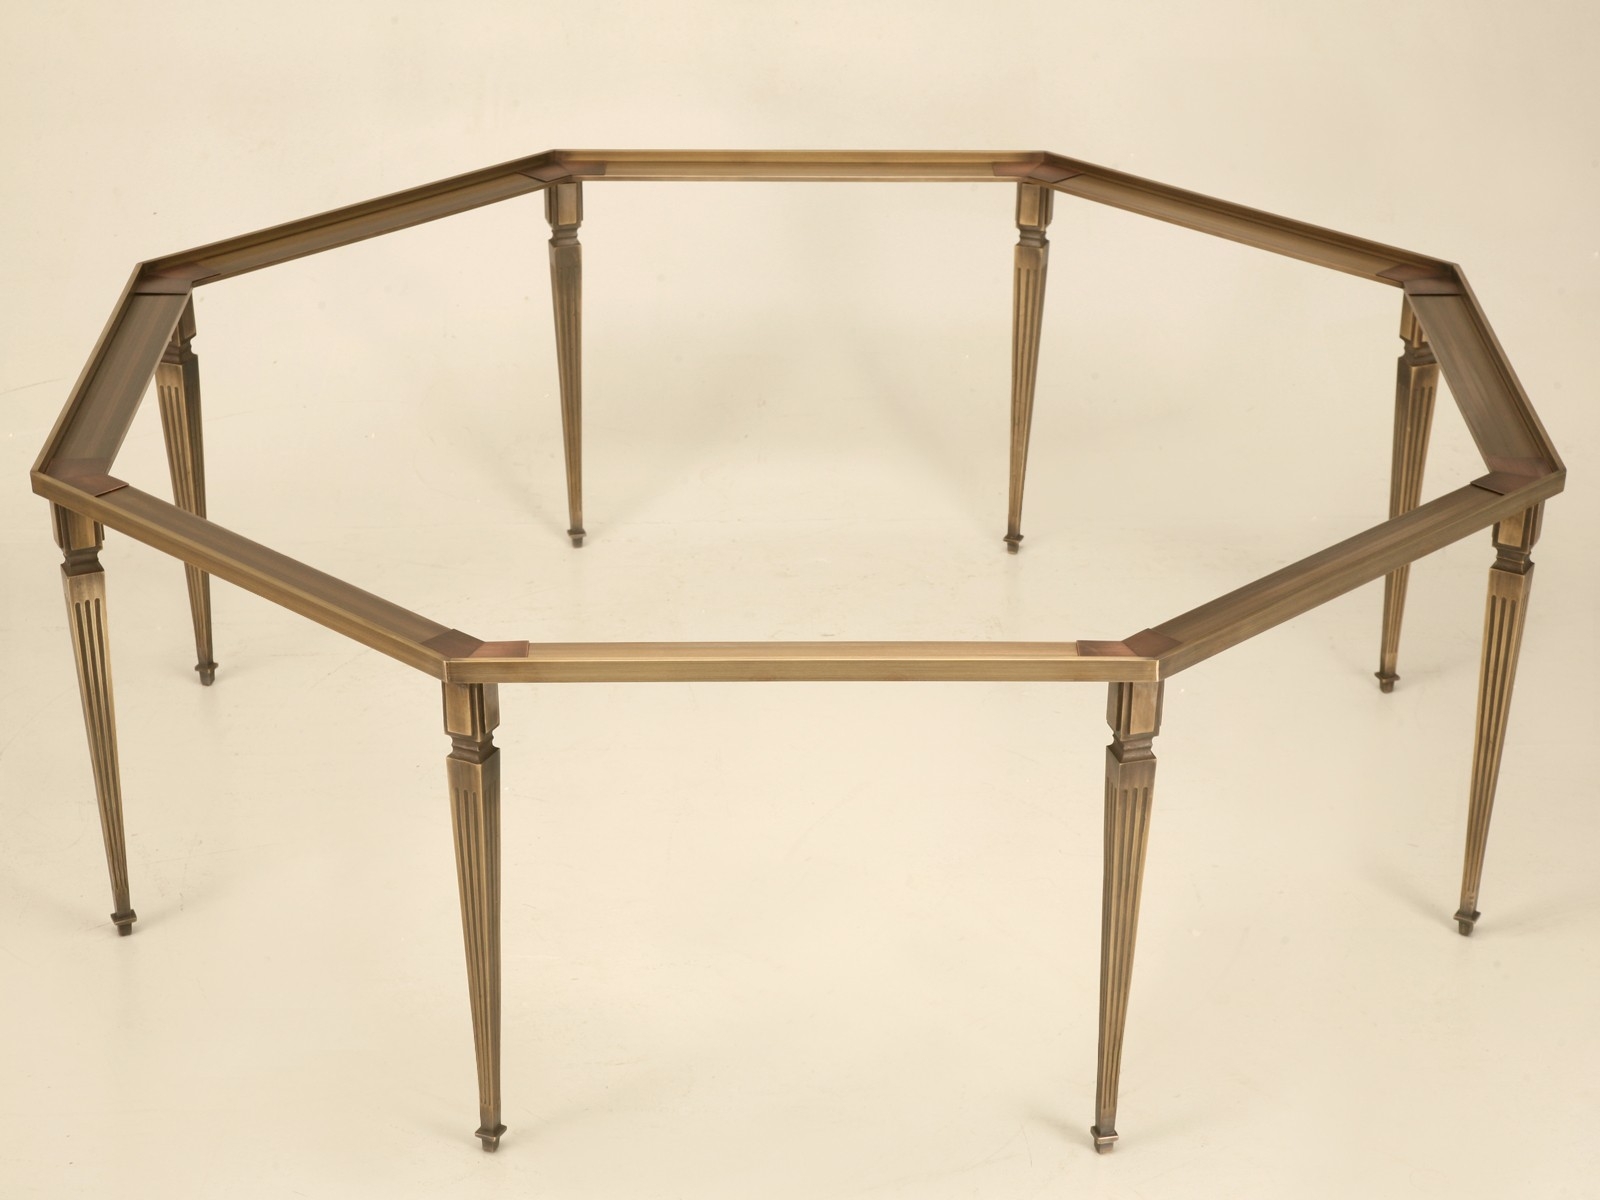 Old Plank Road Custom Bronze Coffee Table Base Available in any Size